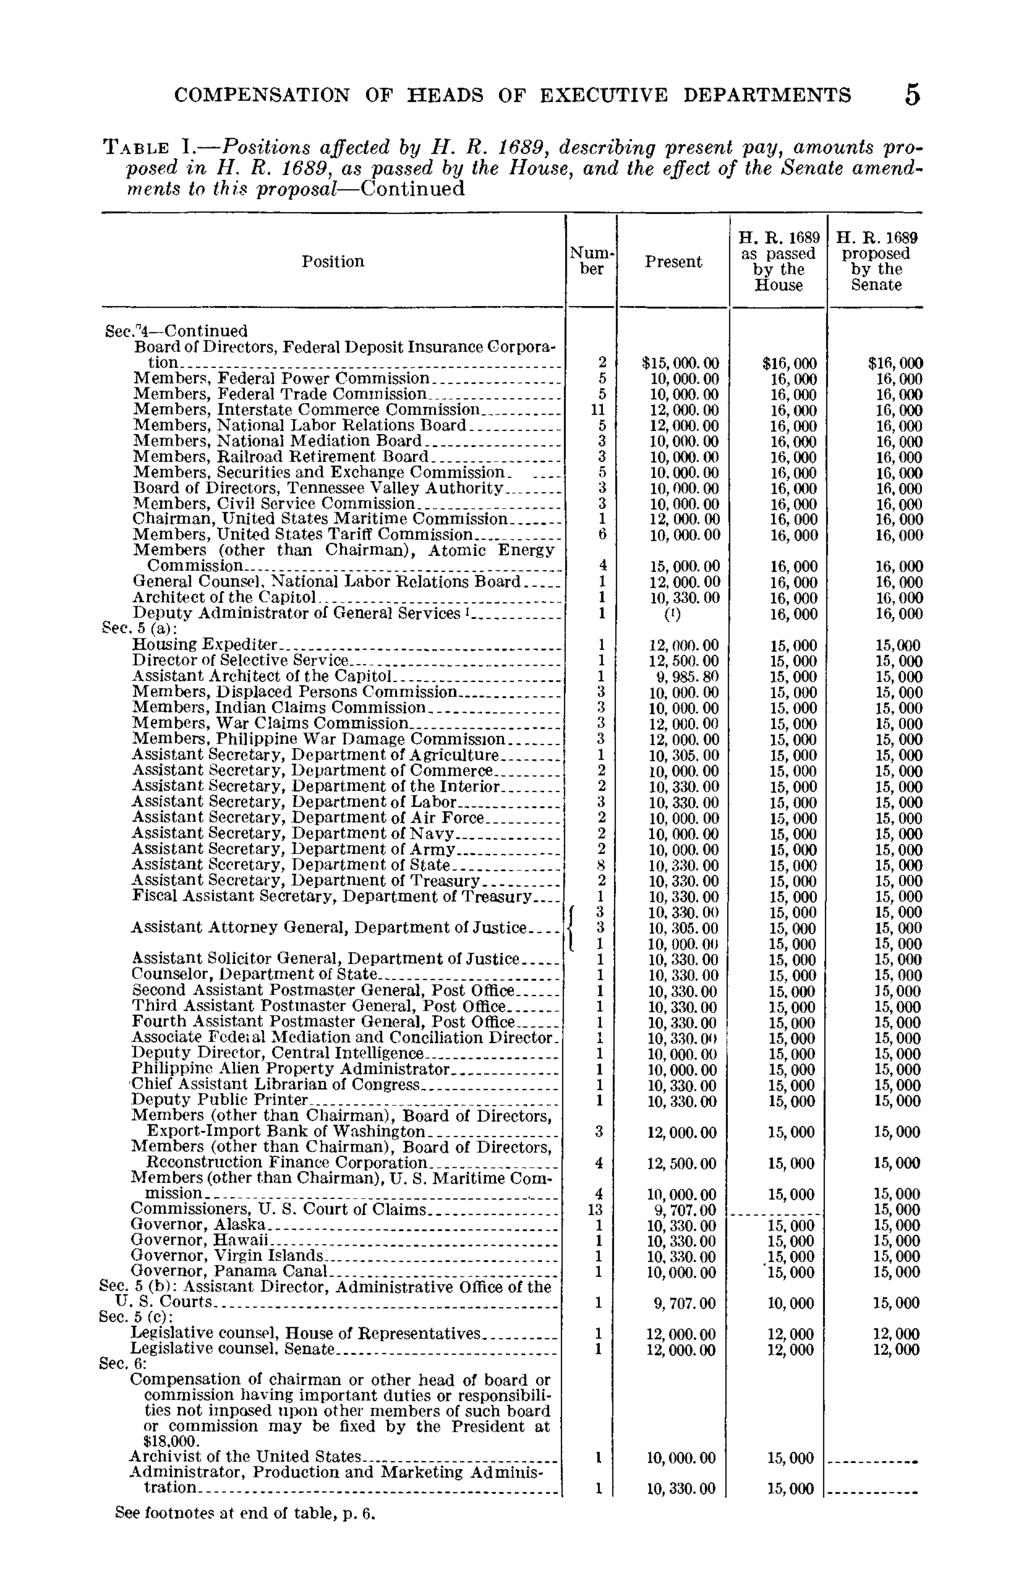 COMPENSATION OF HEADS OF EXECUTIVE DEPARTMENTS TABLE I. Positions affected by H. R. 689, describing present pay, amounts proposed in H. R. 689, as passed House, and the effect of the Senate amendments to this proposal Continued Position Num ber Present H.